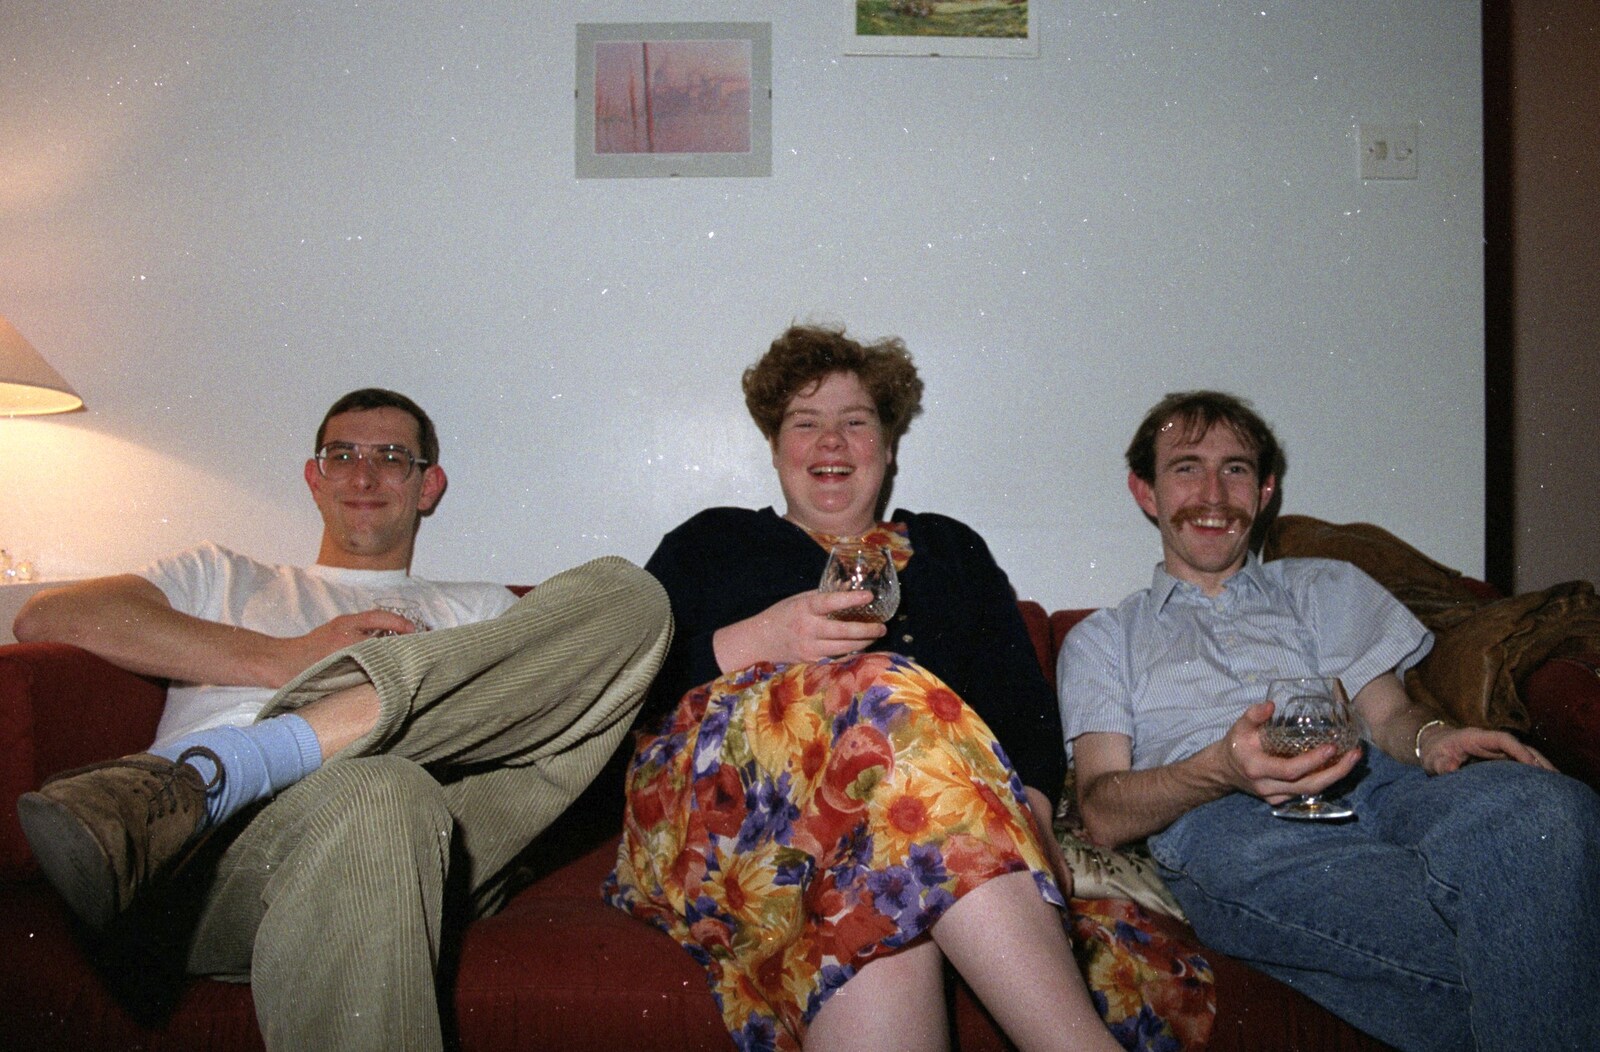 Andy, Kate and Dave in the Mutton Cove flat from Plymouth and The Chapel, Hoo Meavy, Devon - 25th July 1991